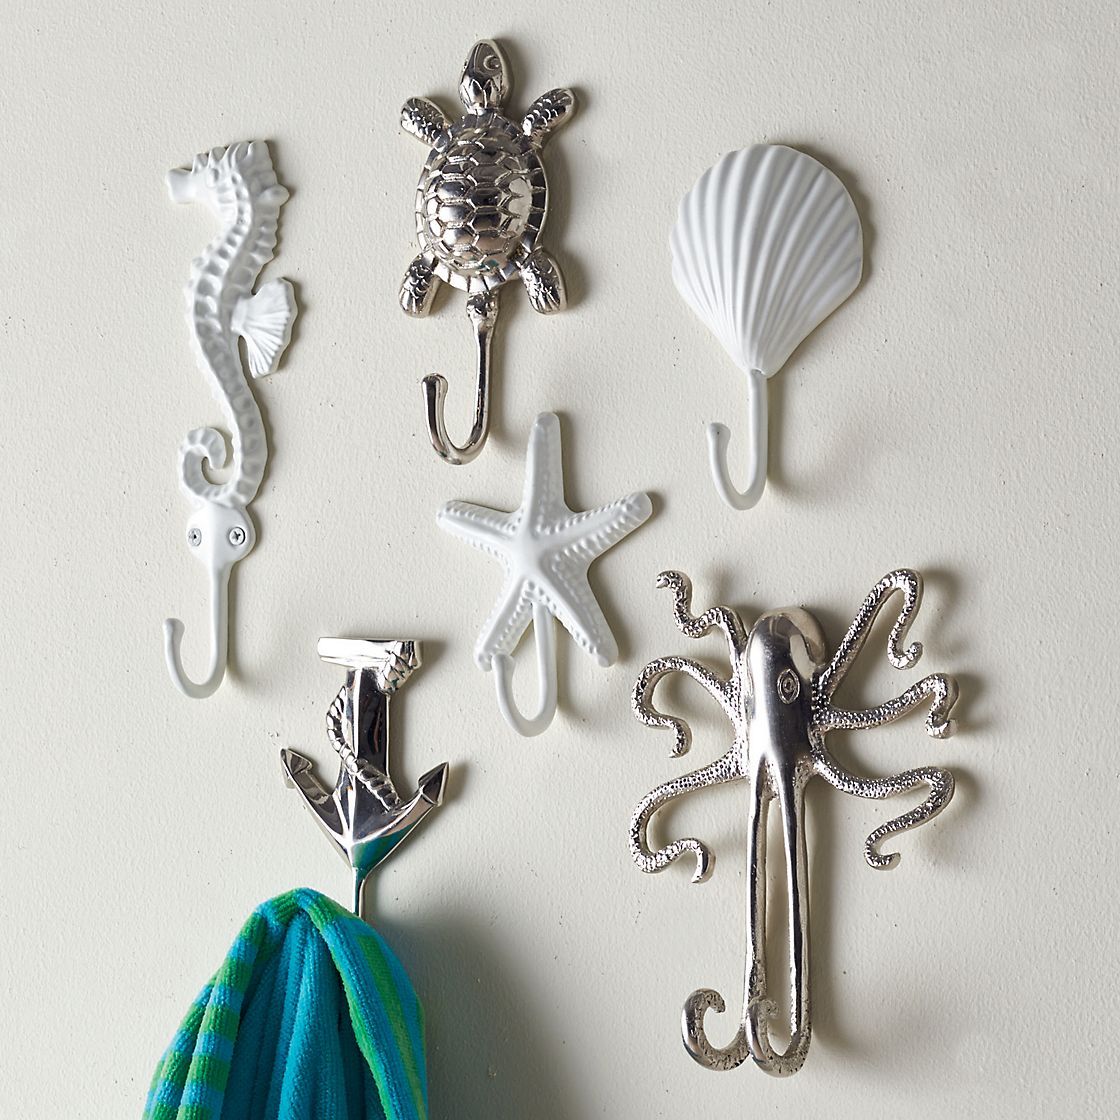 Seaside Towel Hooks The Company Store Summer Preview House Decor